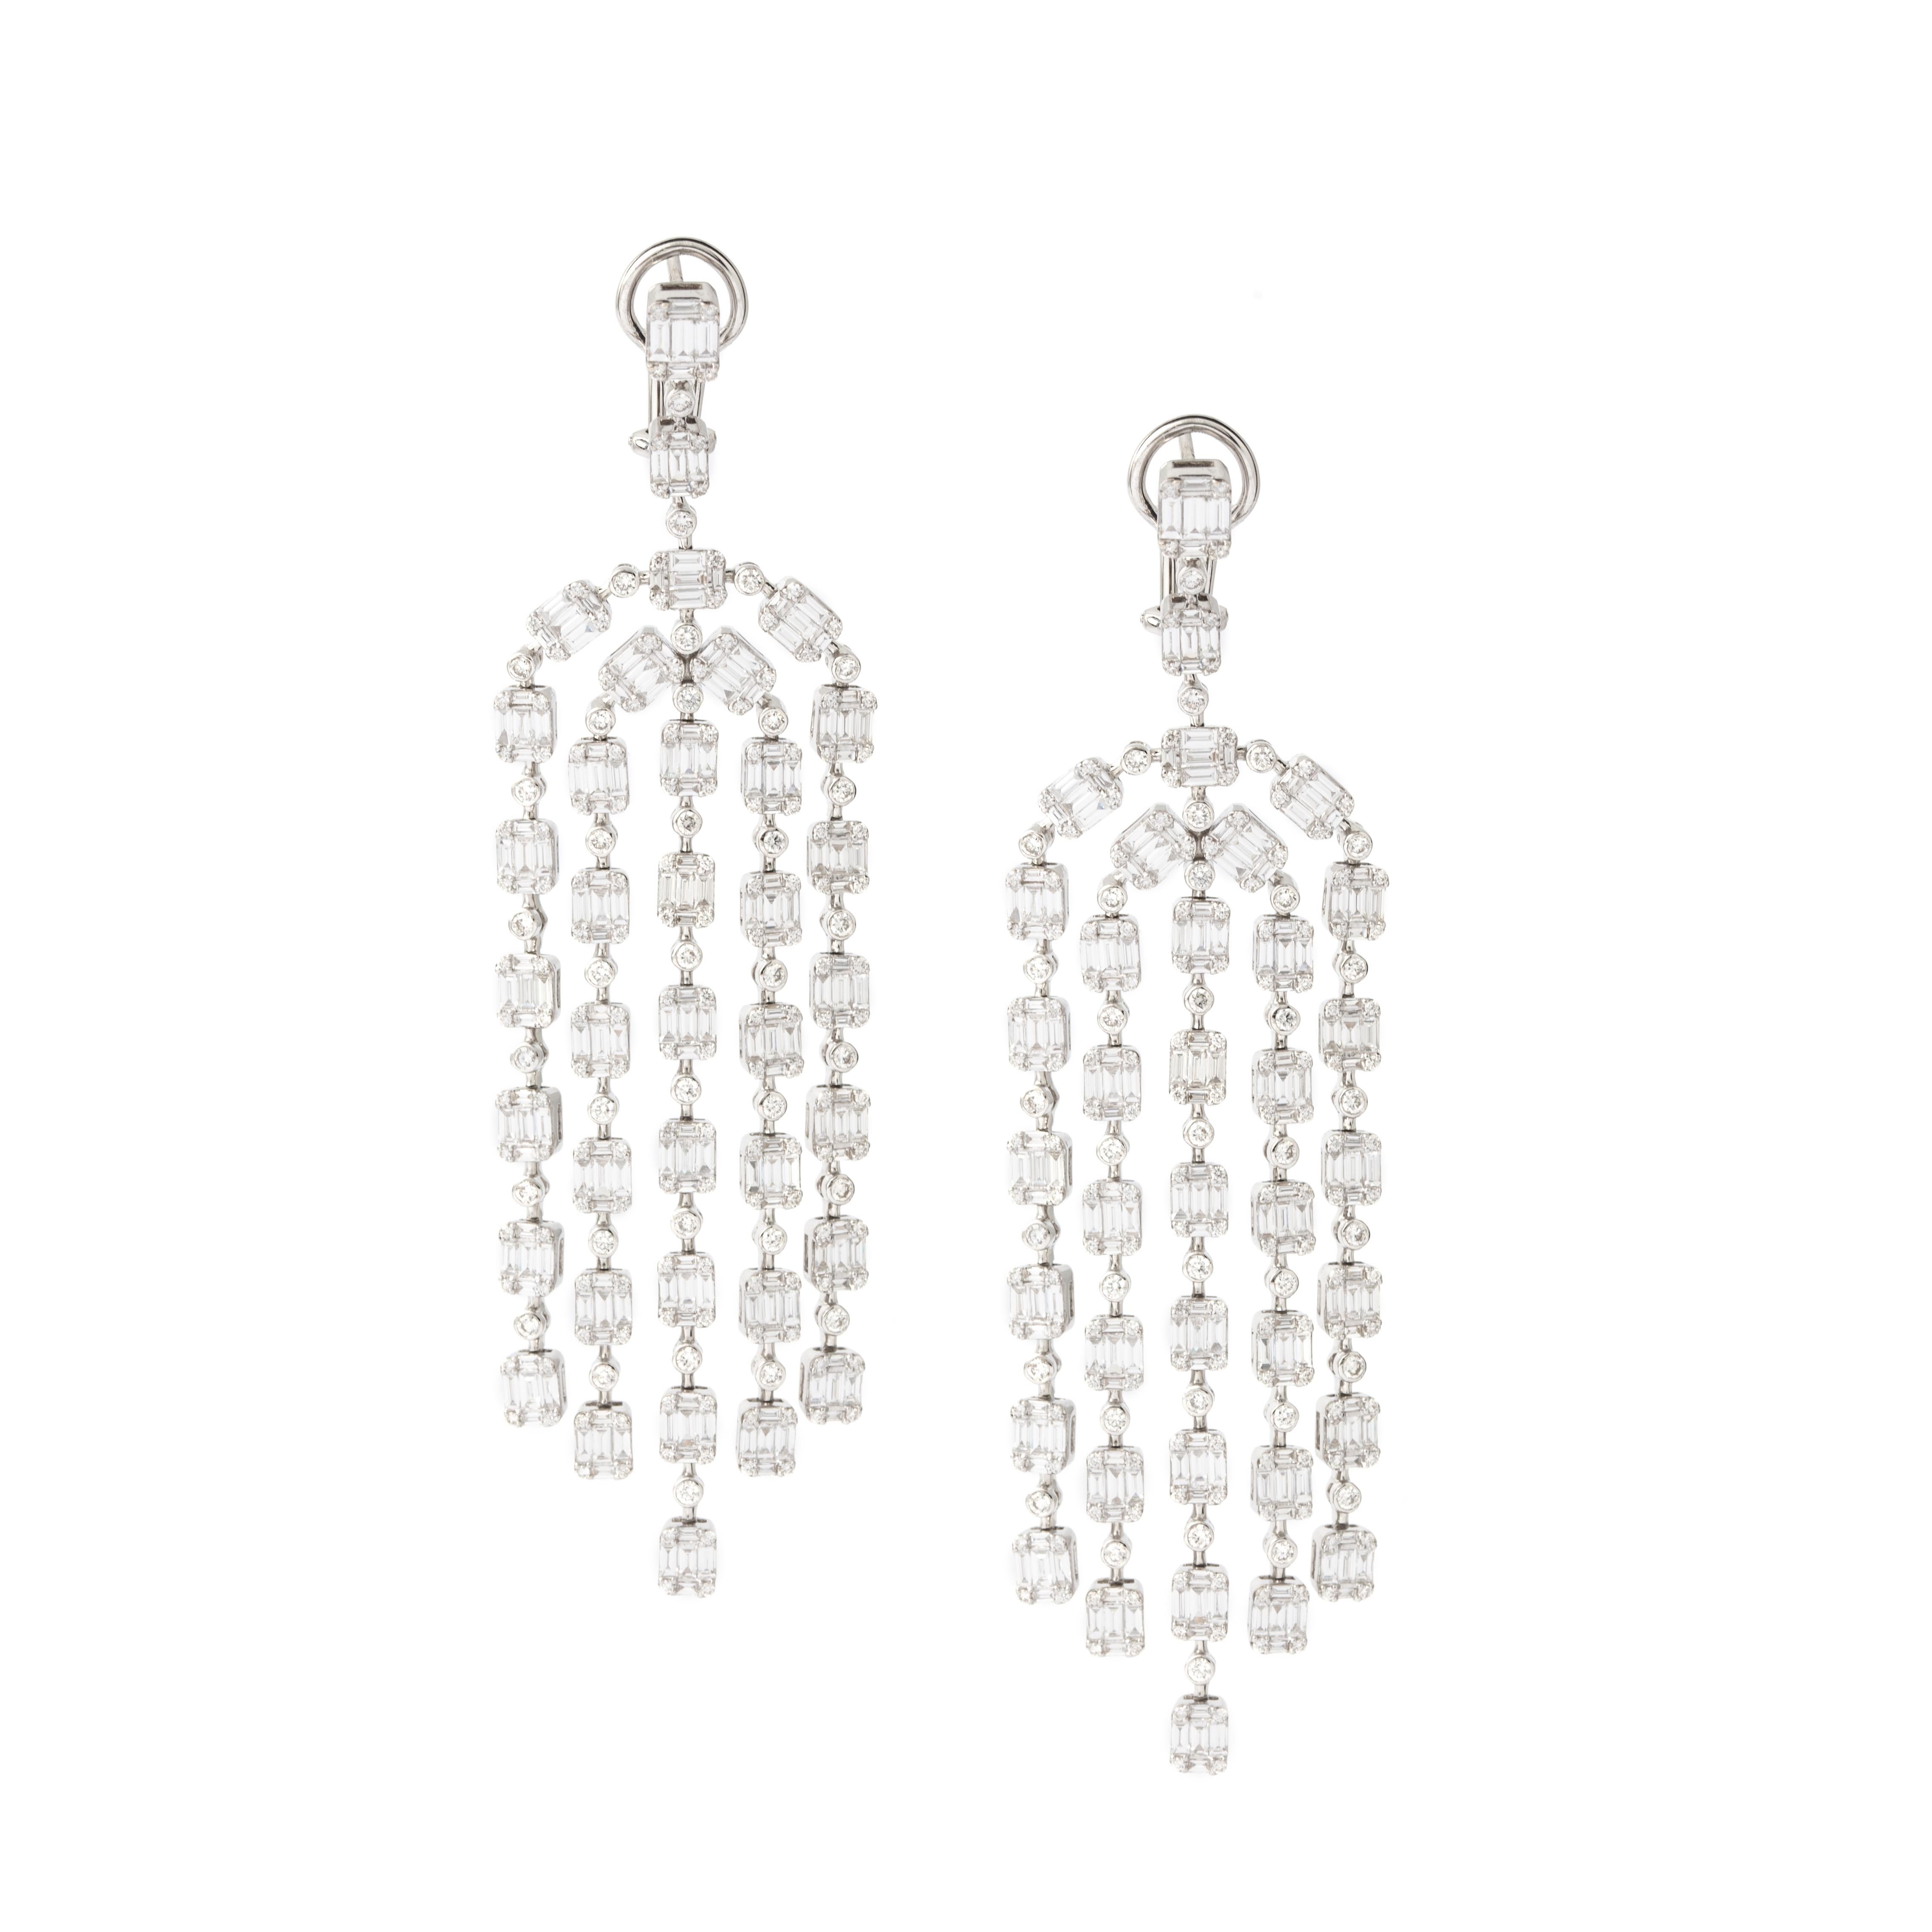 Earrings in 18kt white gold set with 380 baguette cut diamonds 6.85 cts and 376 diamonds 2.34 cts.

Length: 9.00 centimeters (3.54 inches).

Maximum Width : 2.5 centimeters (0.98 inches).

Total weight: 36.76 grams. 